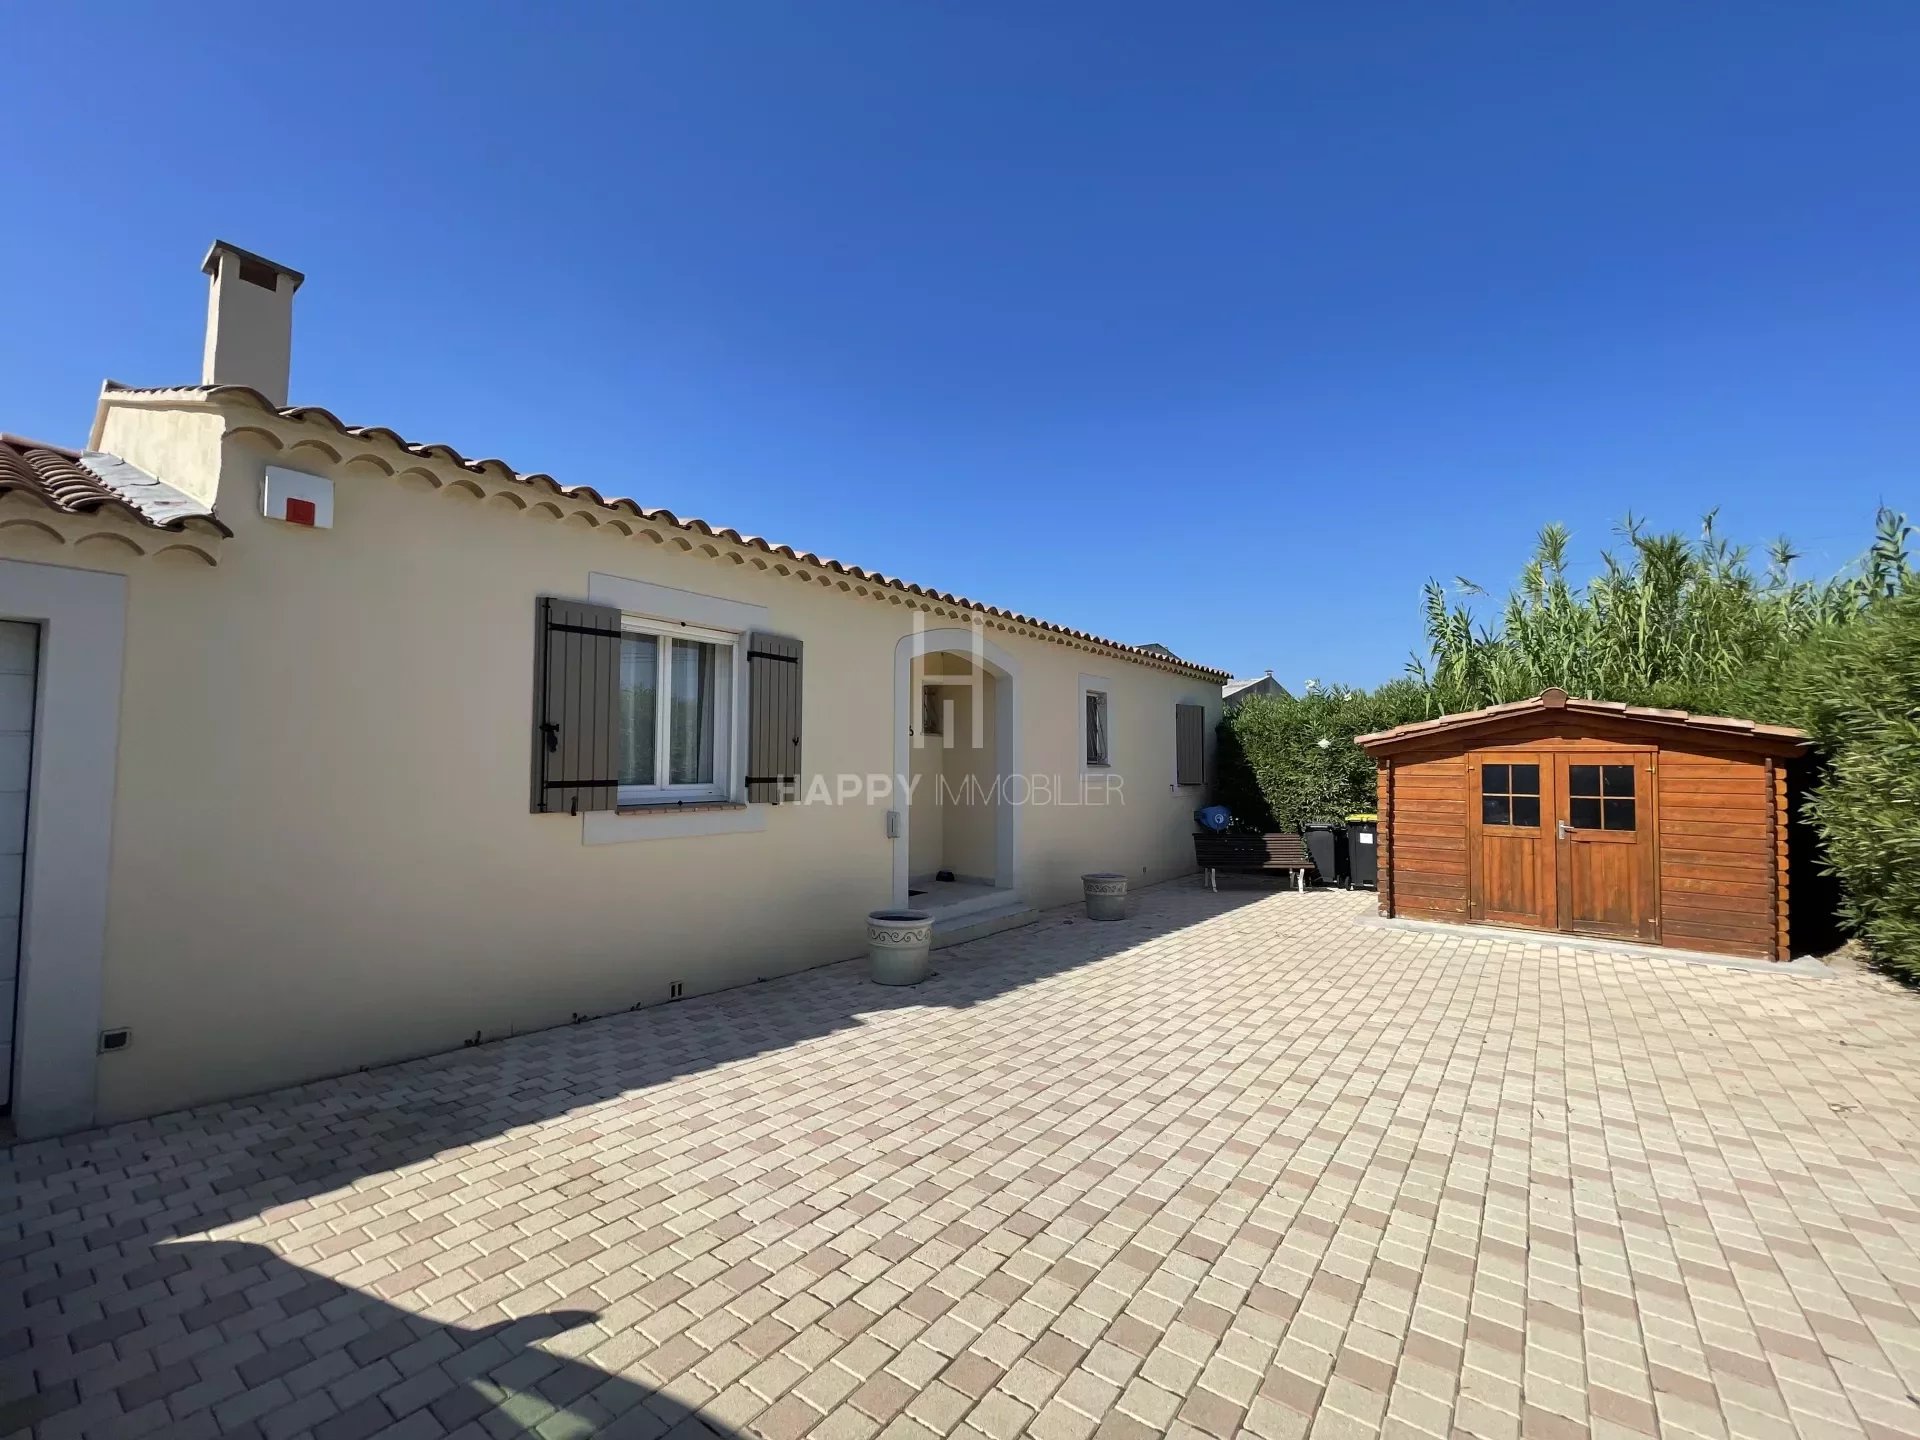 Pretty single storey in the center of the village of Mouriès